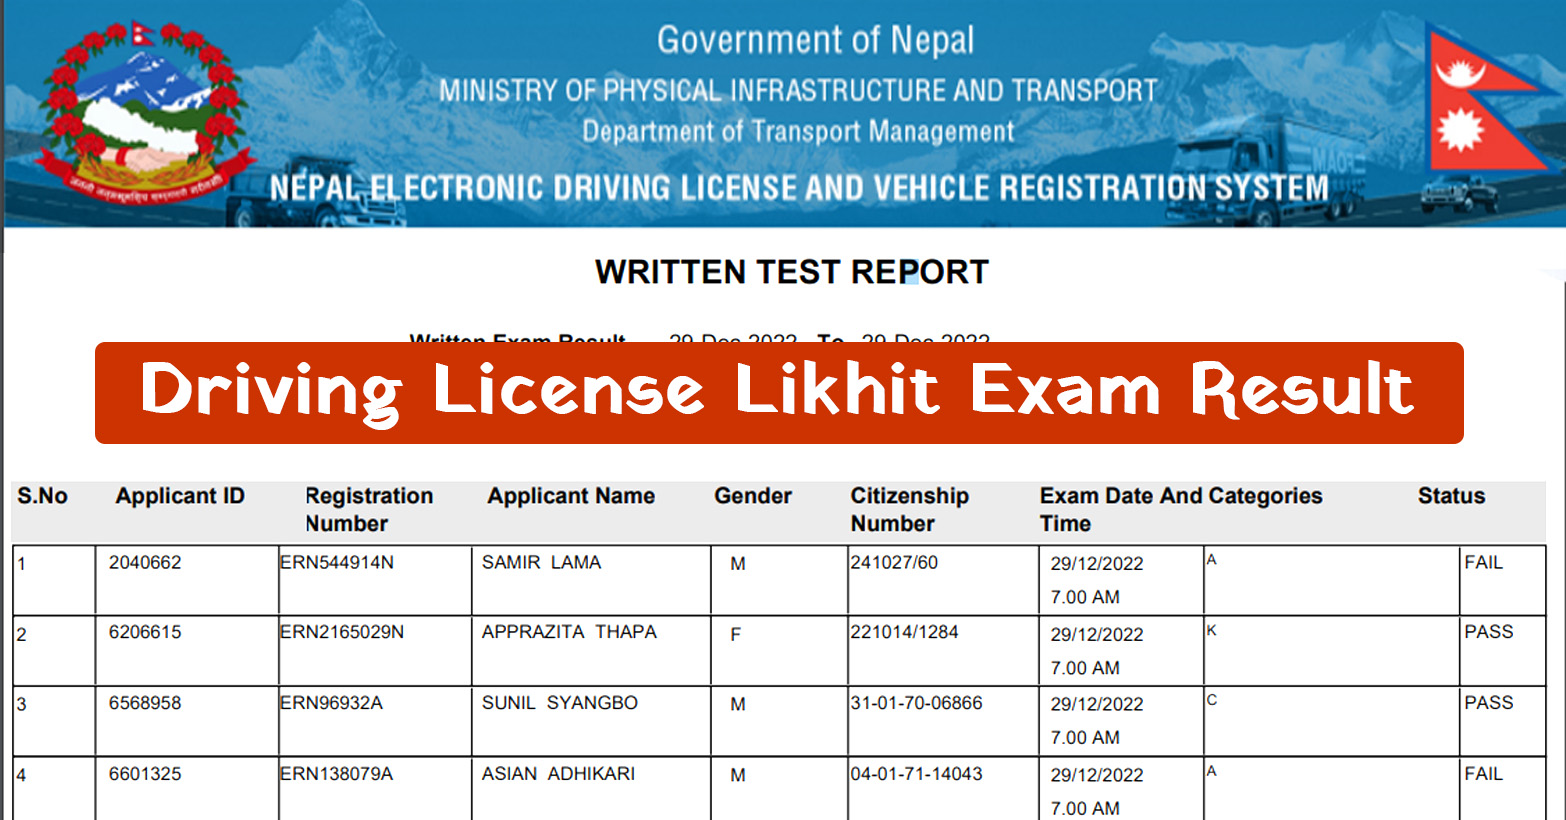 If you have given the written test for driving license in Nepal and are waiting for the result, you can check your driving license written exam results online.